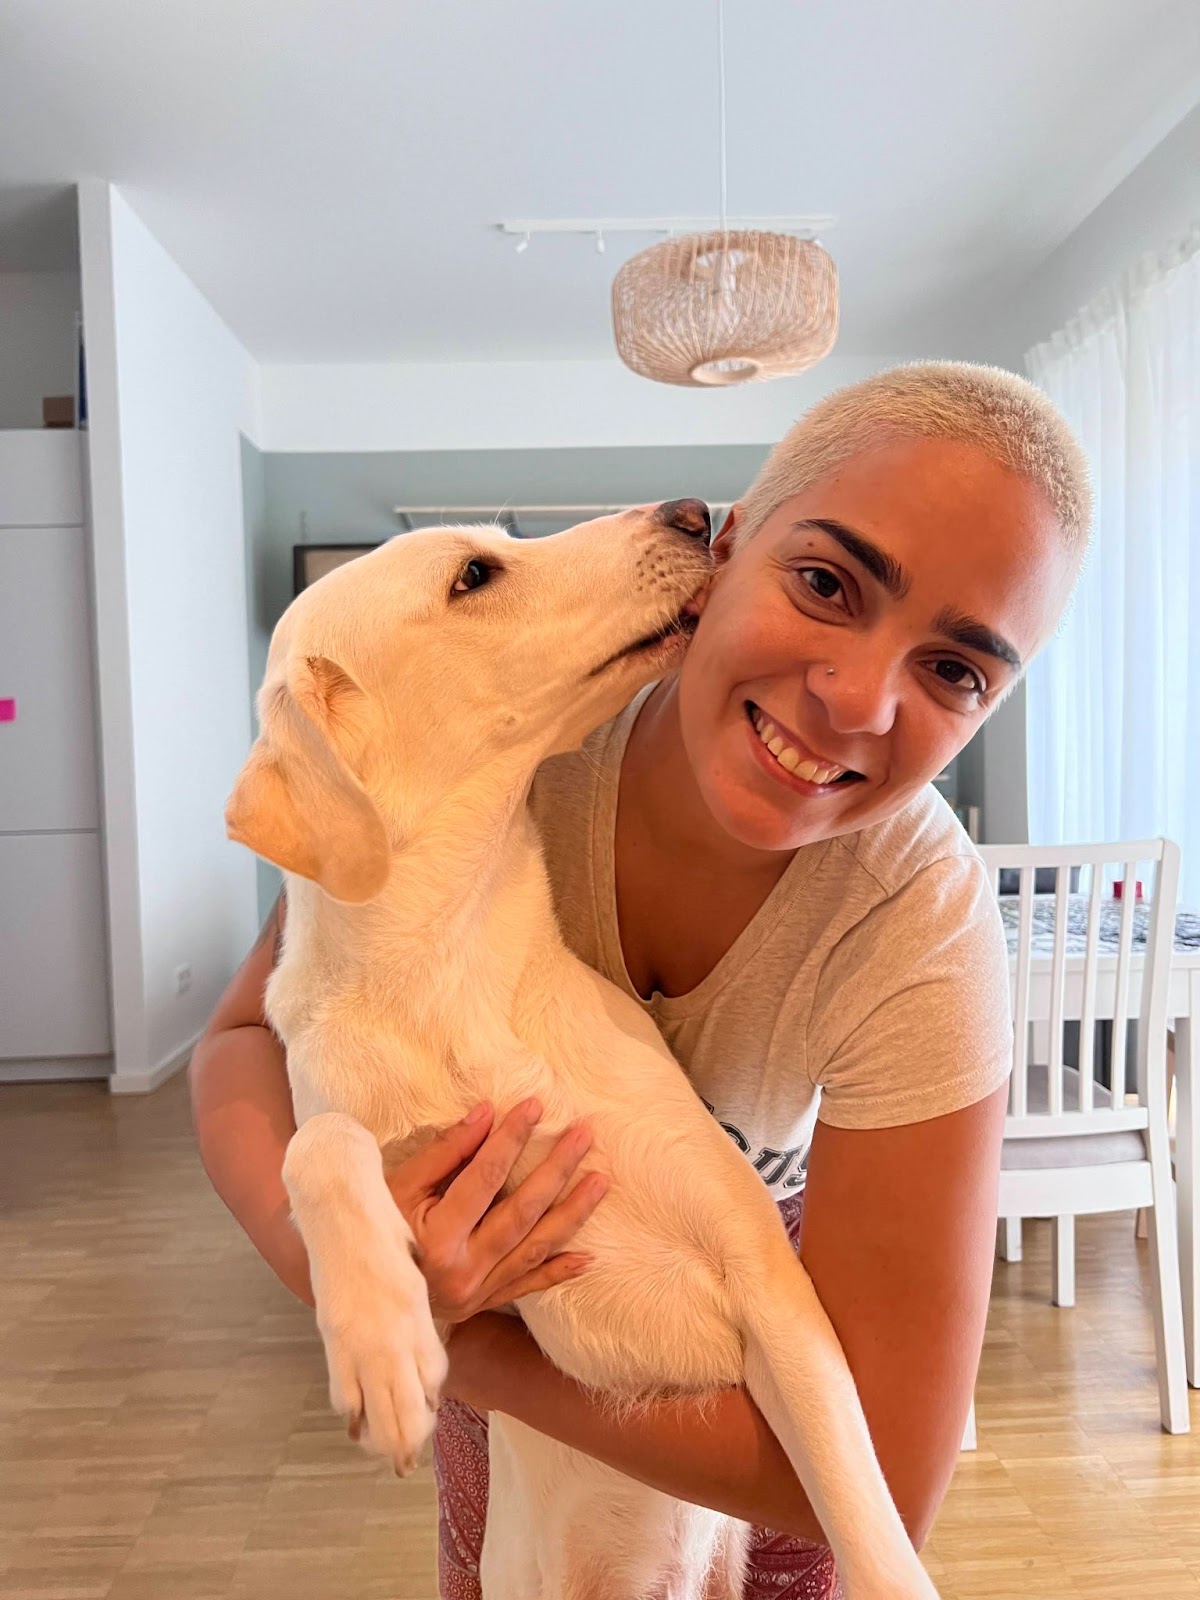 Me and my dog Tonino. I"m a black woman, with shaved and dyed hair, holding my dog while he licks my face